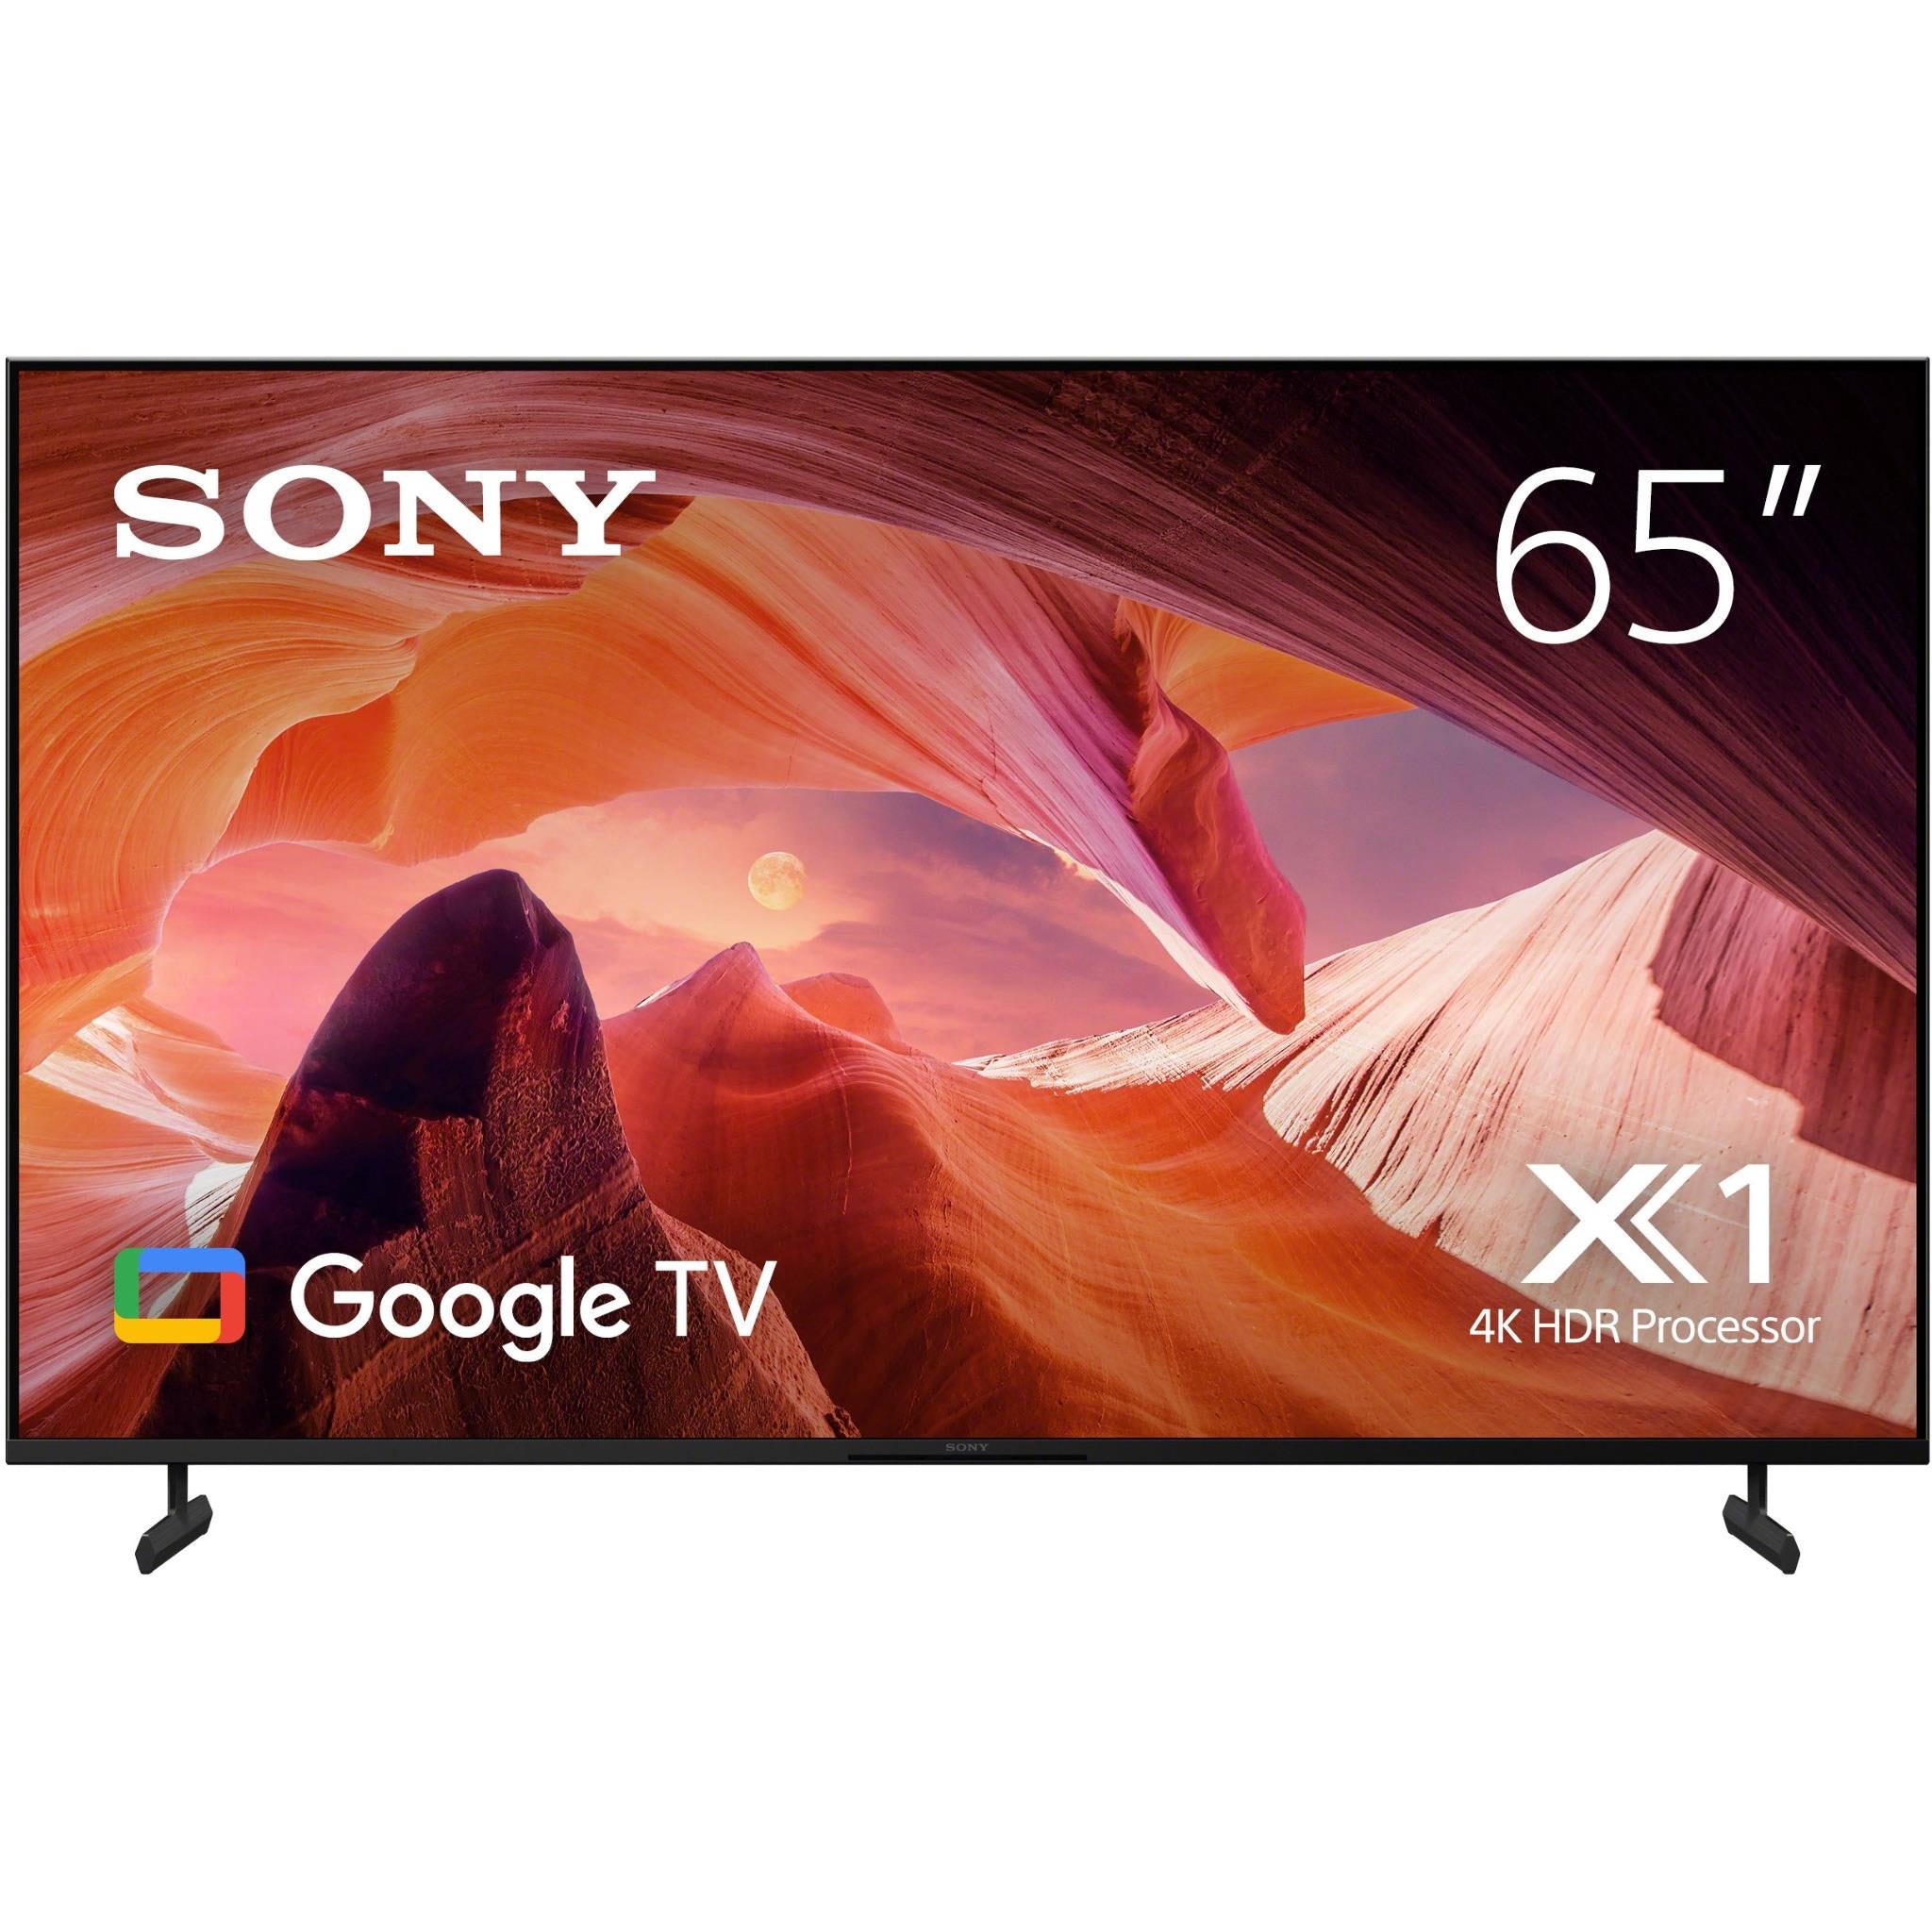 Sony A80j 65 Inch Tv Bravia Xr Oled 4k Ultra Hd Smart Google Tv With Dolby Vision Hdr And Alexa Compatibility Xr65a80j Model